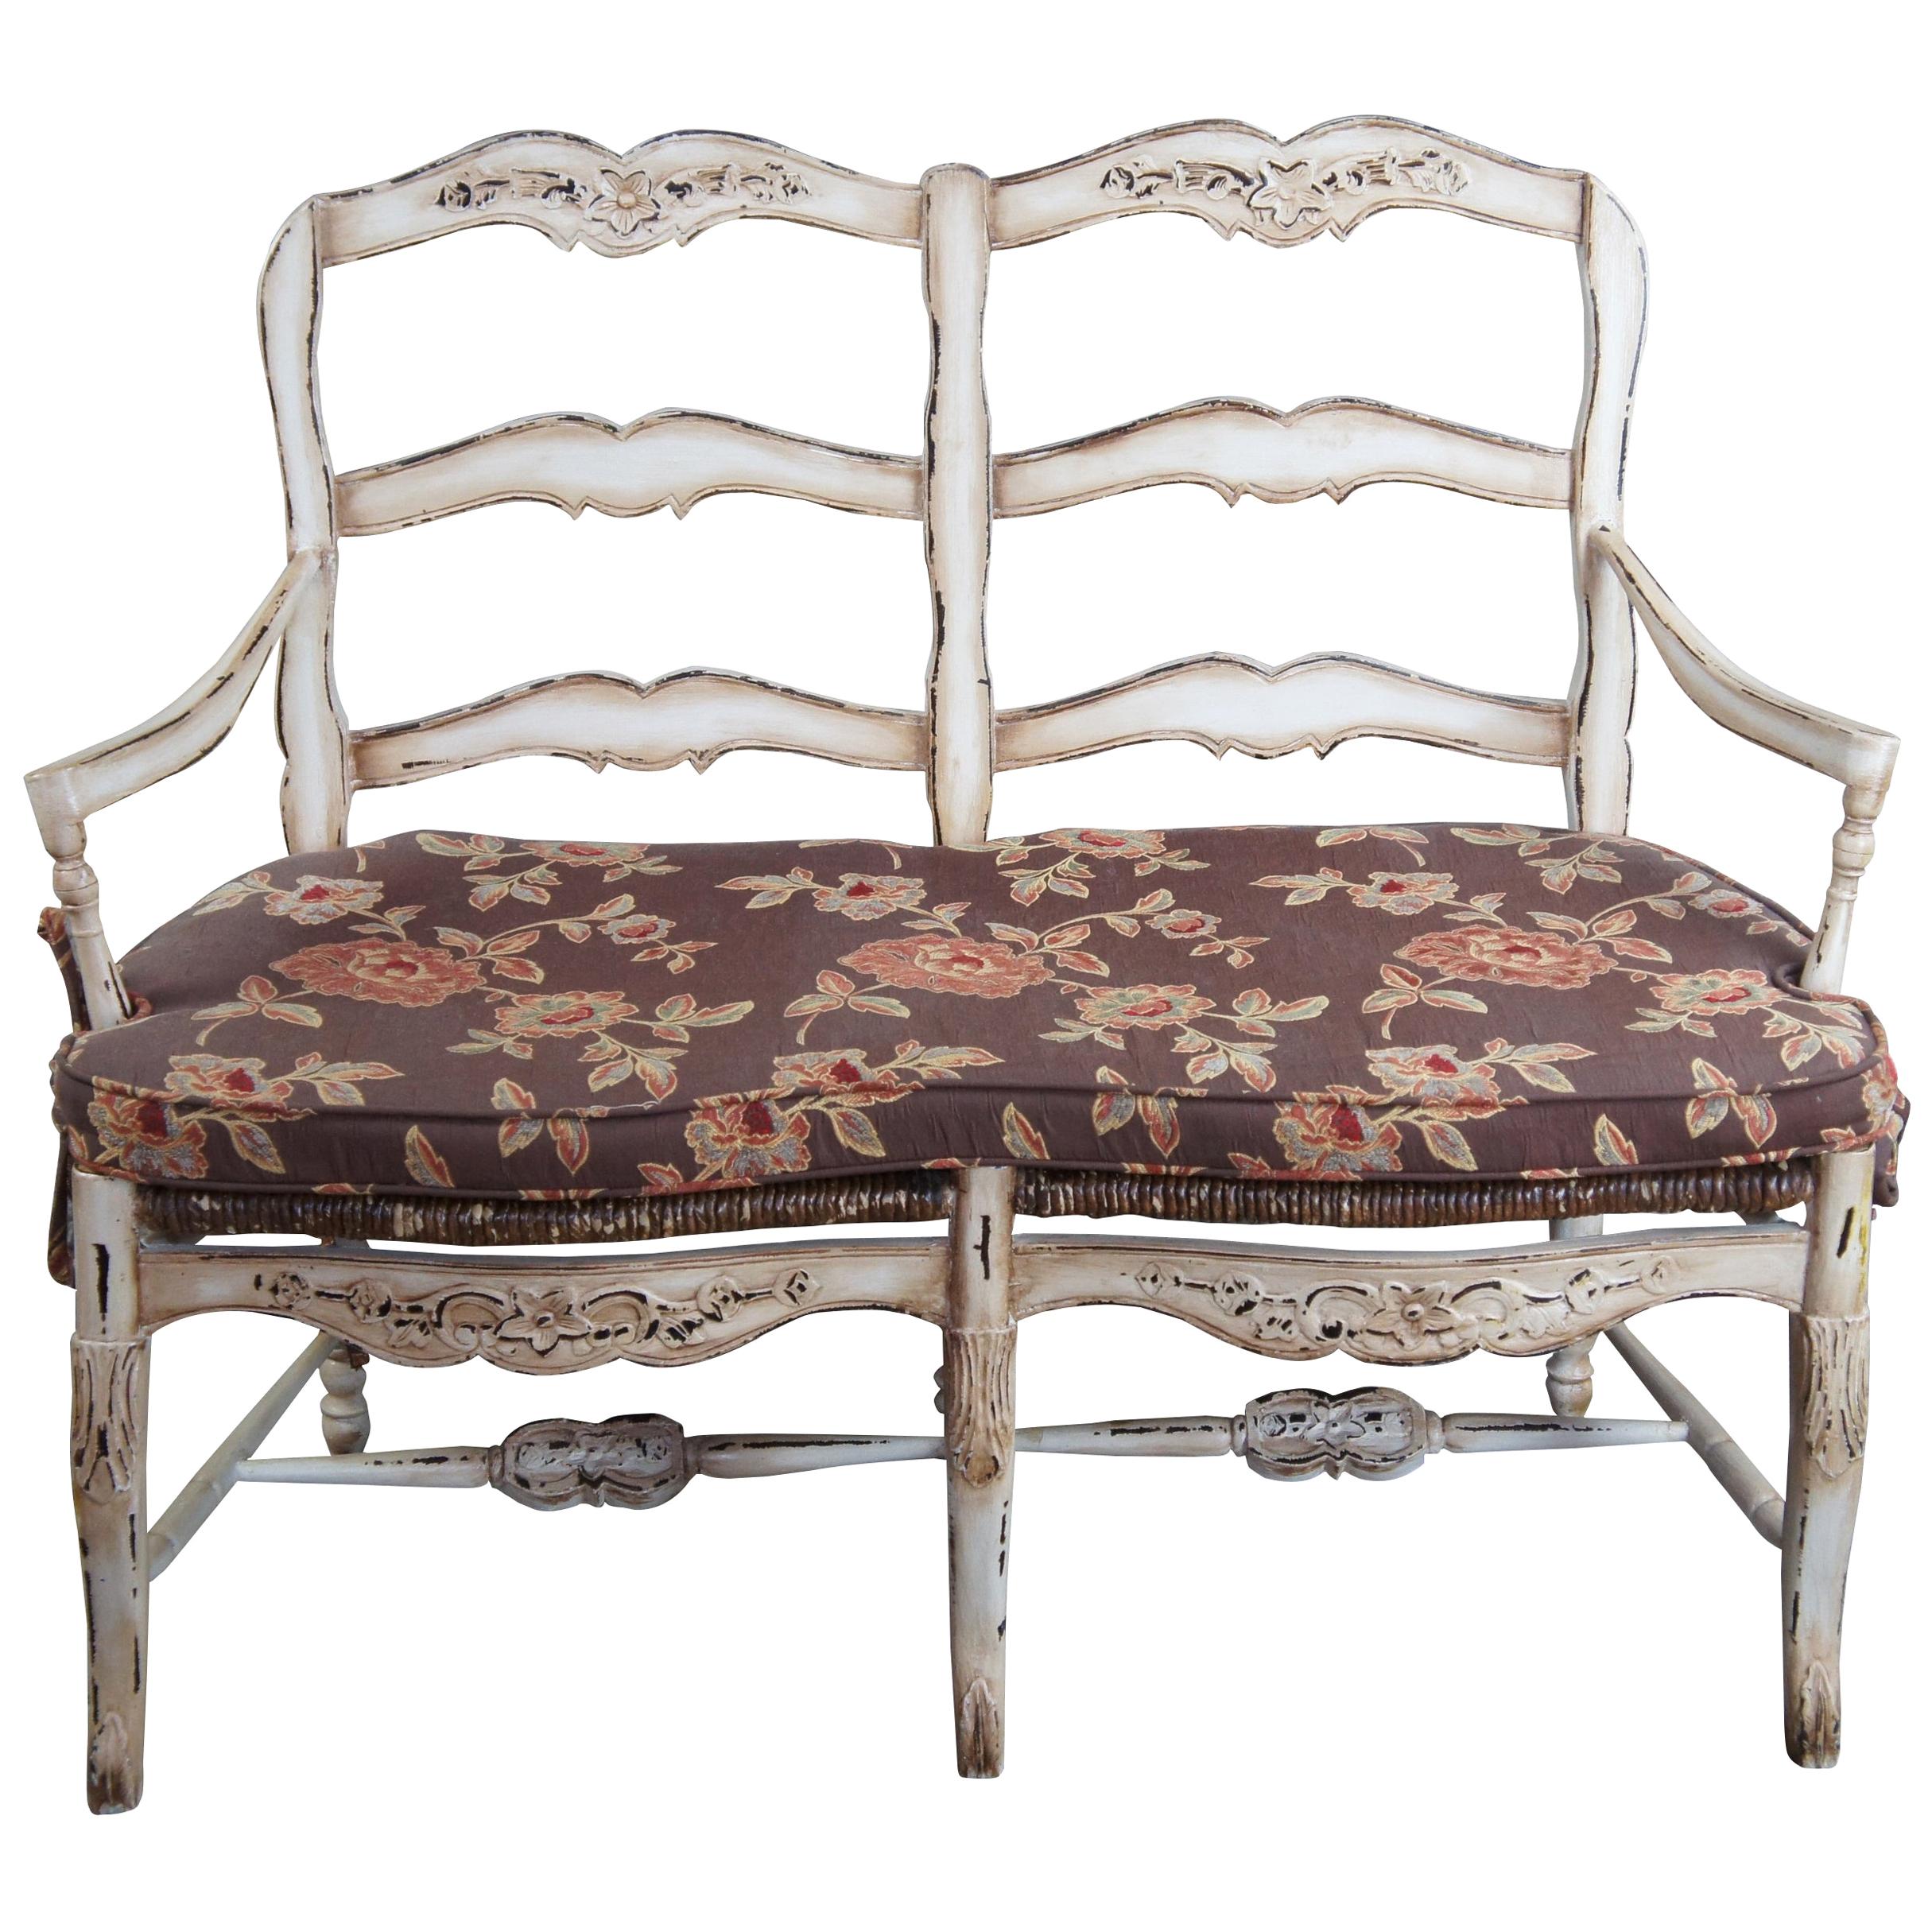 Vintage French Country Chic 2 Seater Ladderback Settee Rush Seat & Cushion